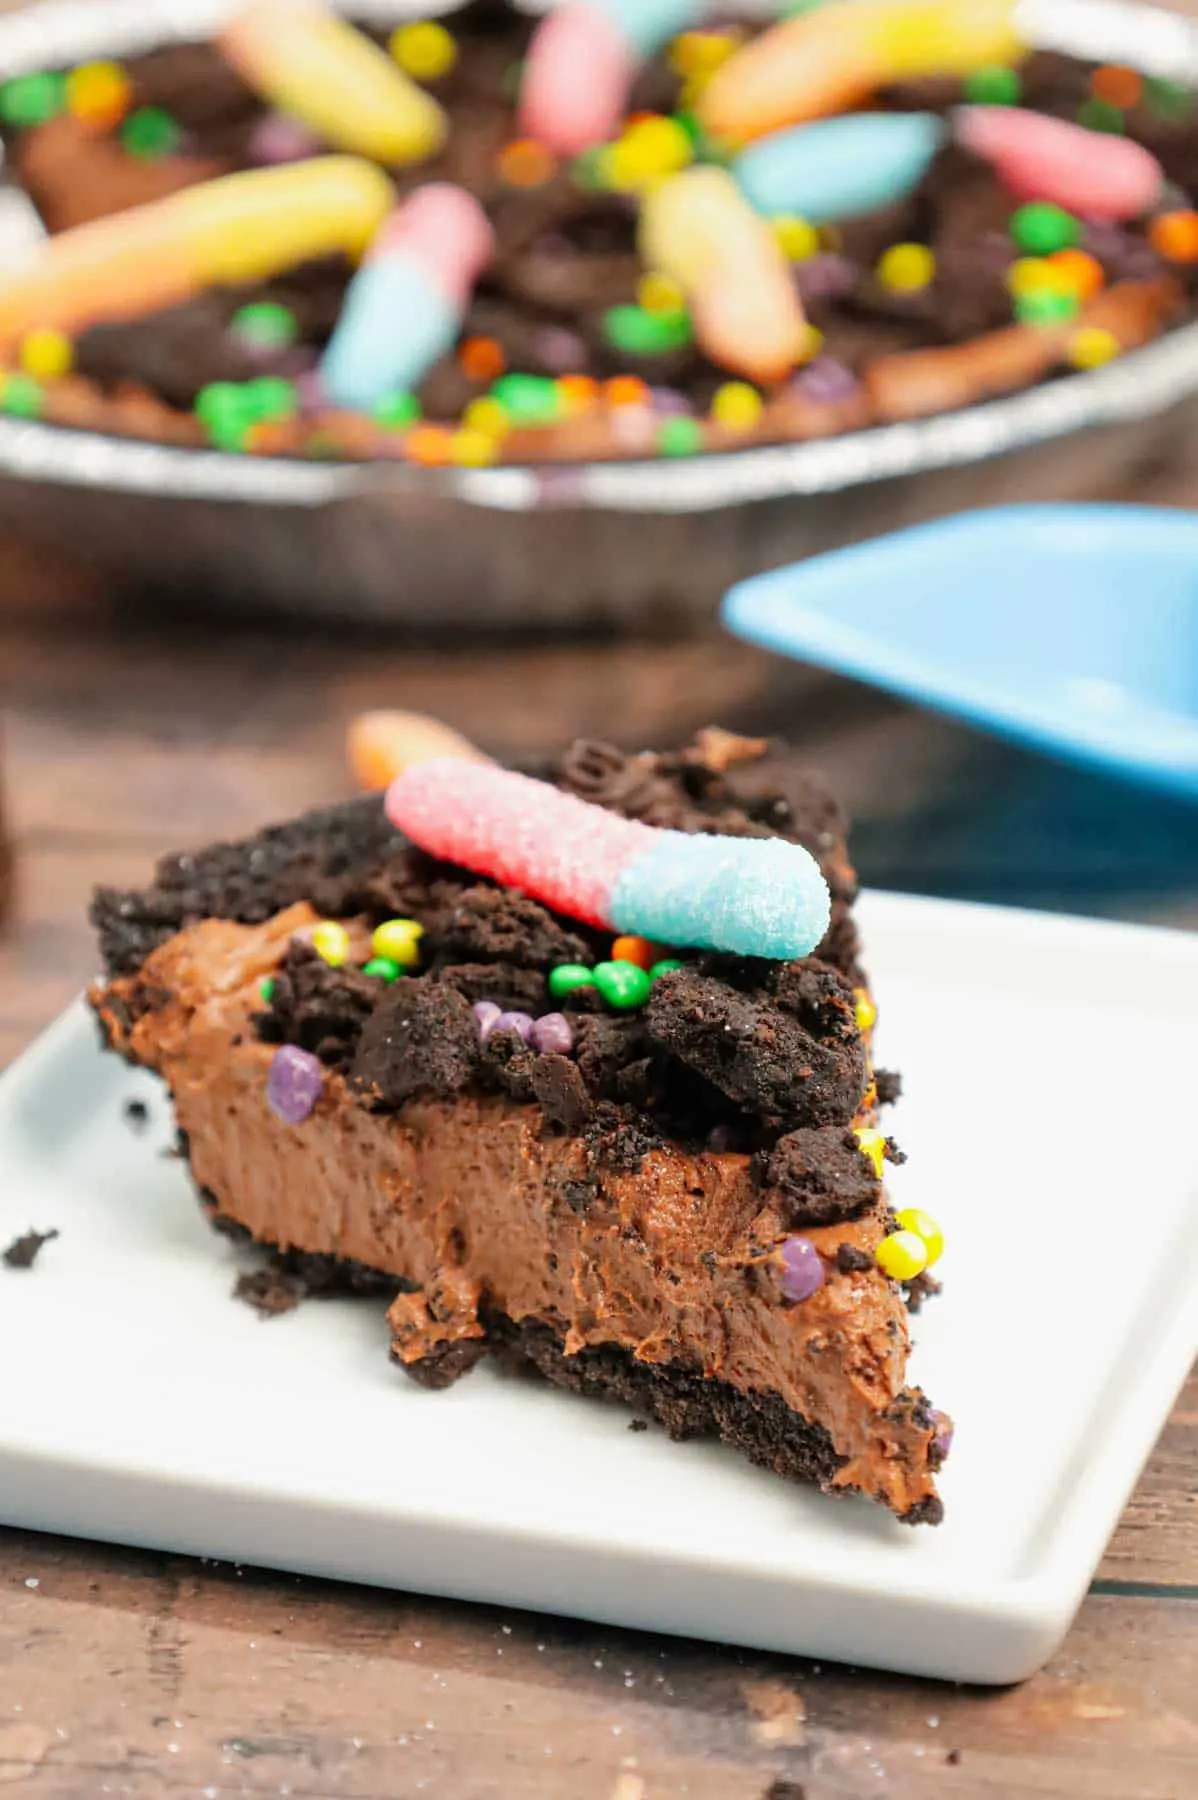 Dirt Pie is a fun and easy no bake pie recipe made with an Oreo pie crust with a chocolate filling and topped with crumbled dark chocolate Oreo cookies and gummy worms.